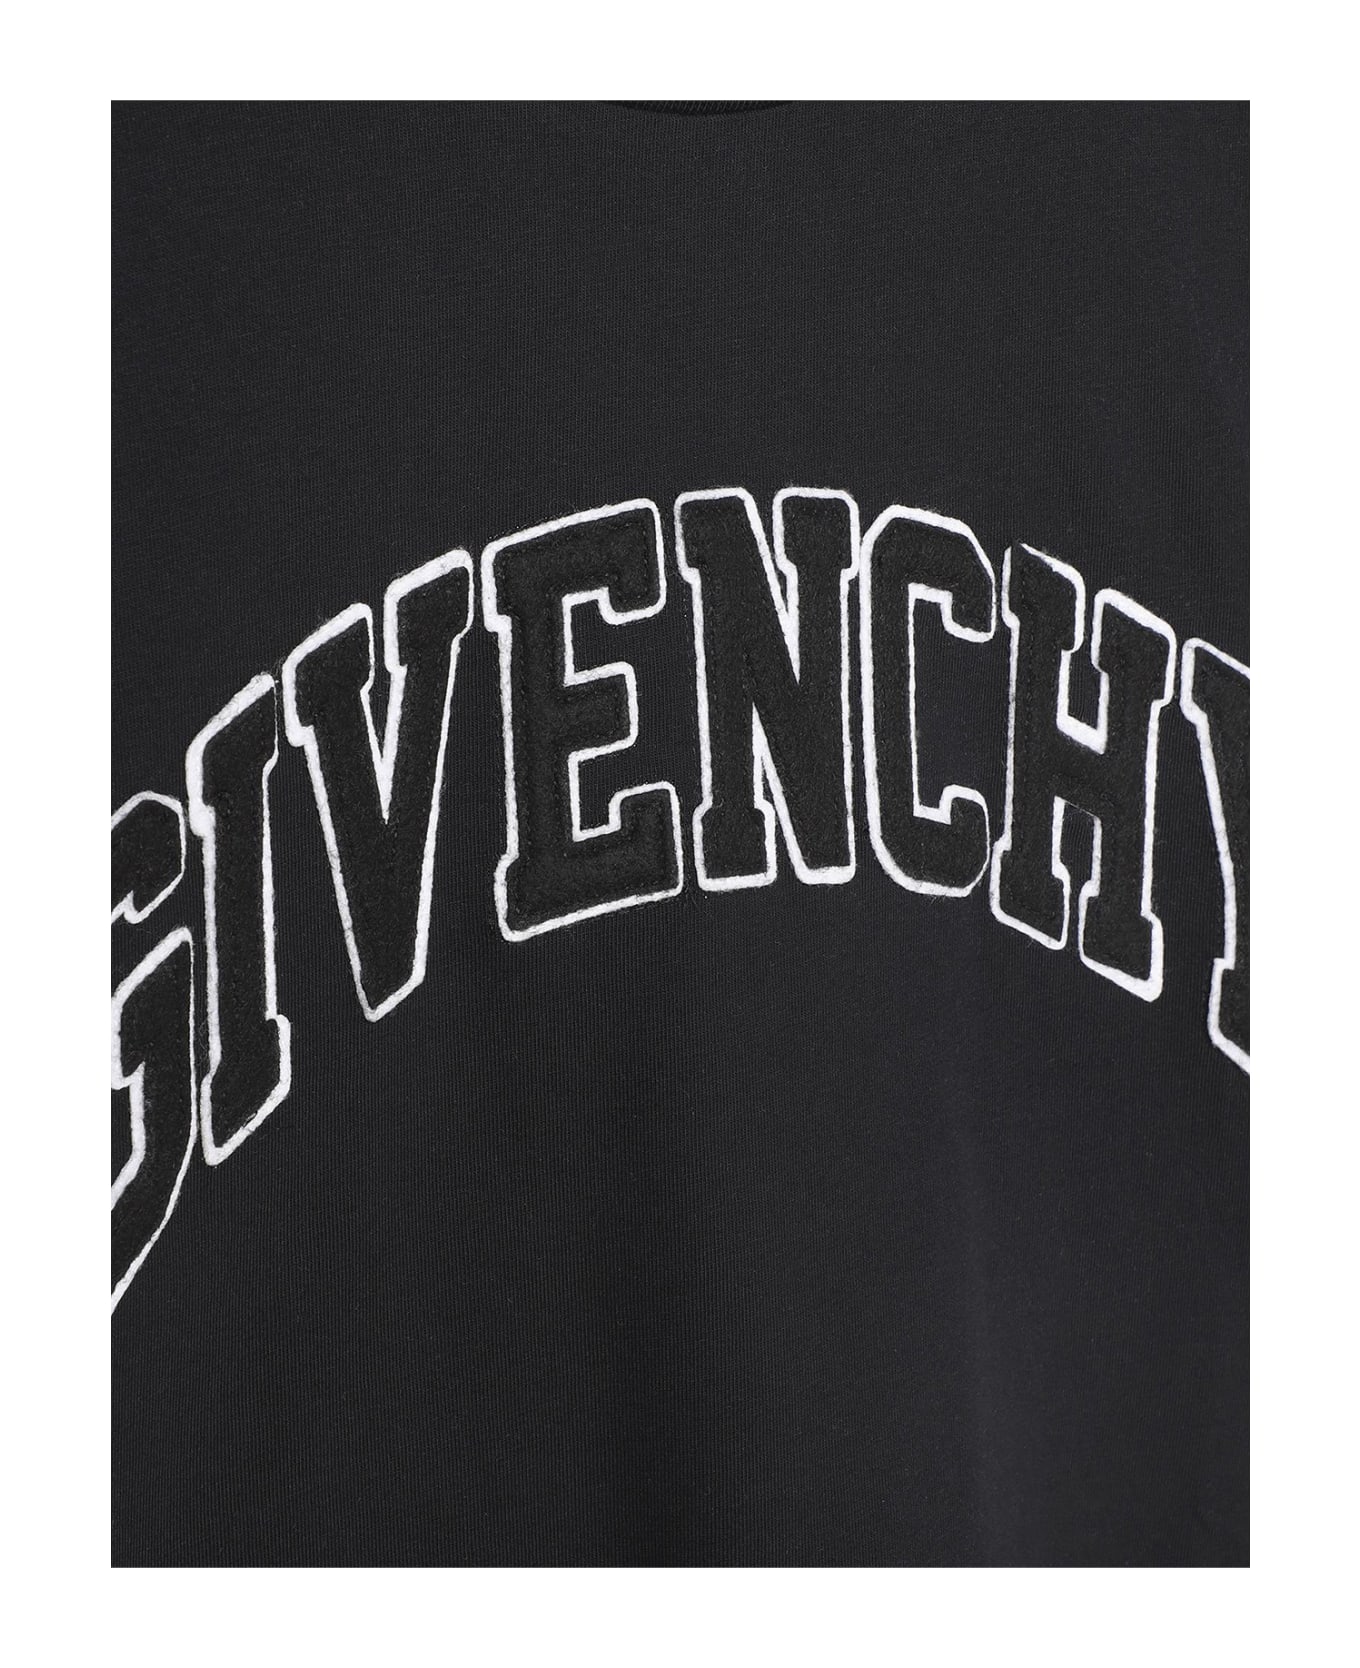 Givenchy Black T-shirt With Applied Arch Logo - B Nero Tシャツ＆ポロシャツ